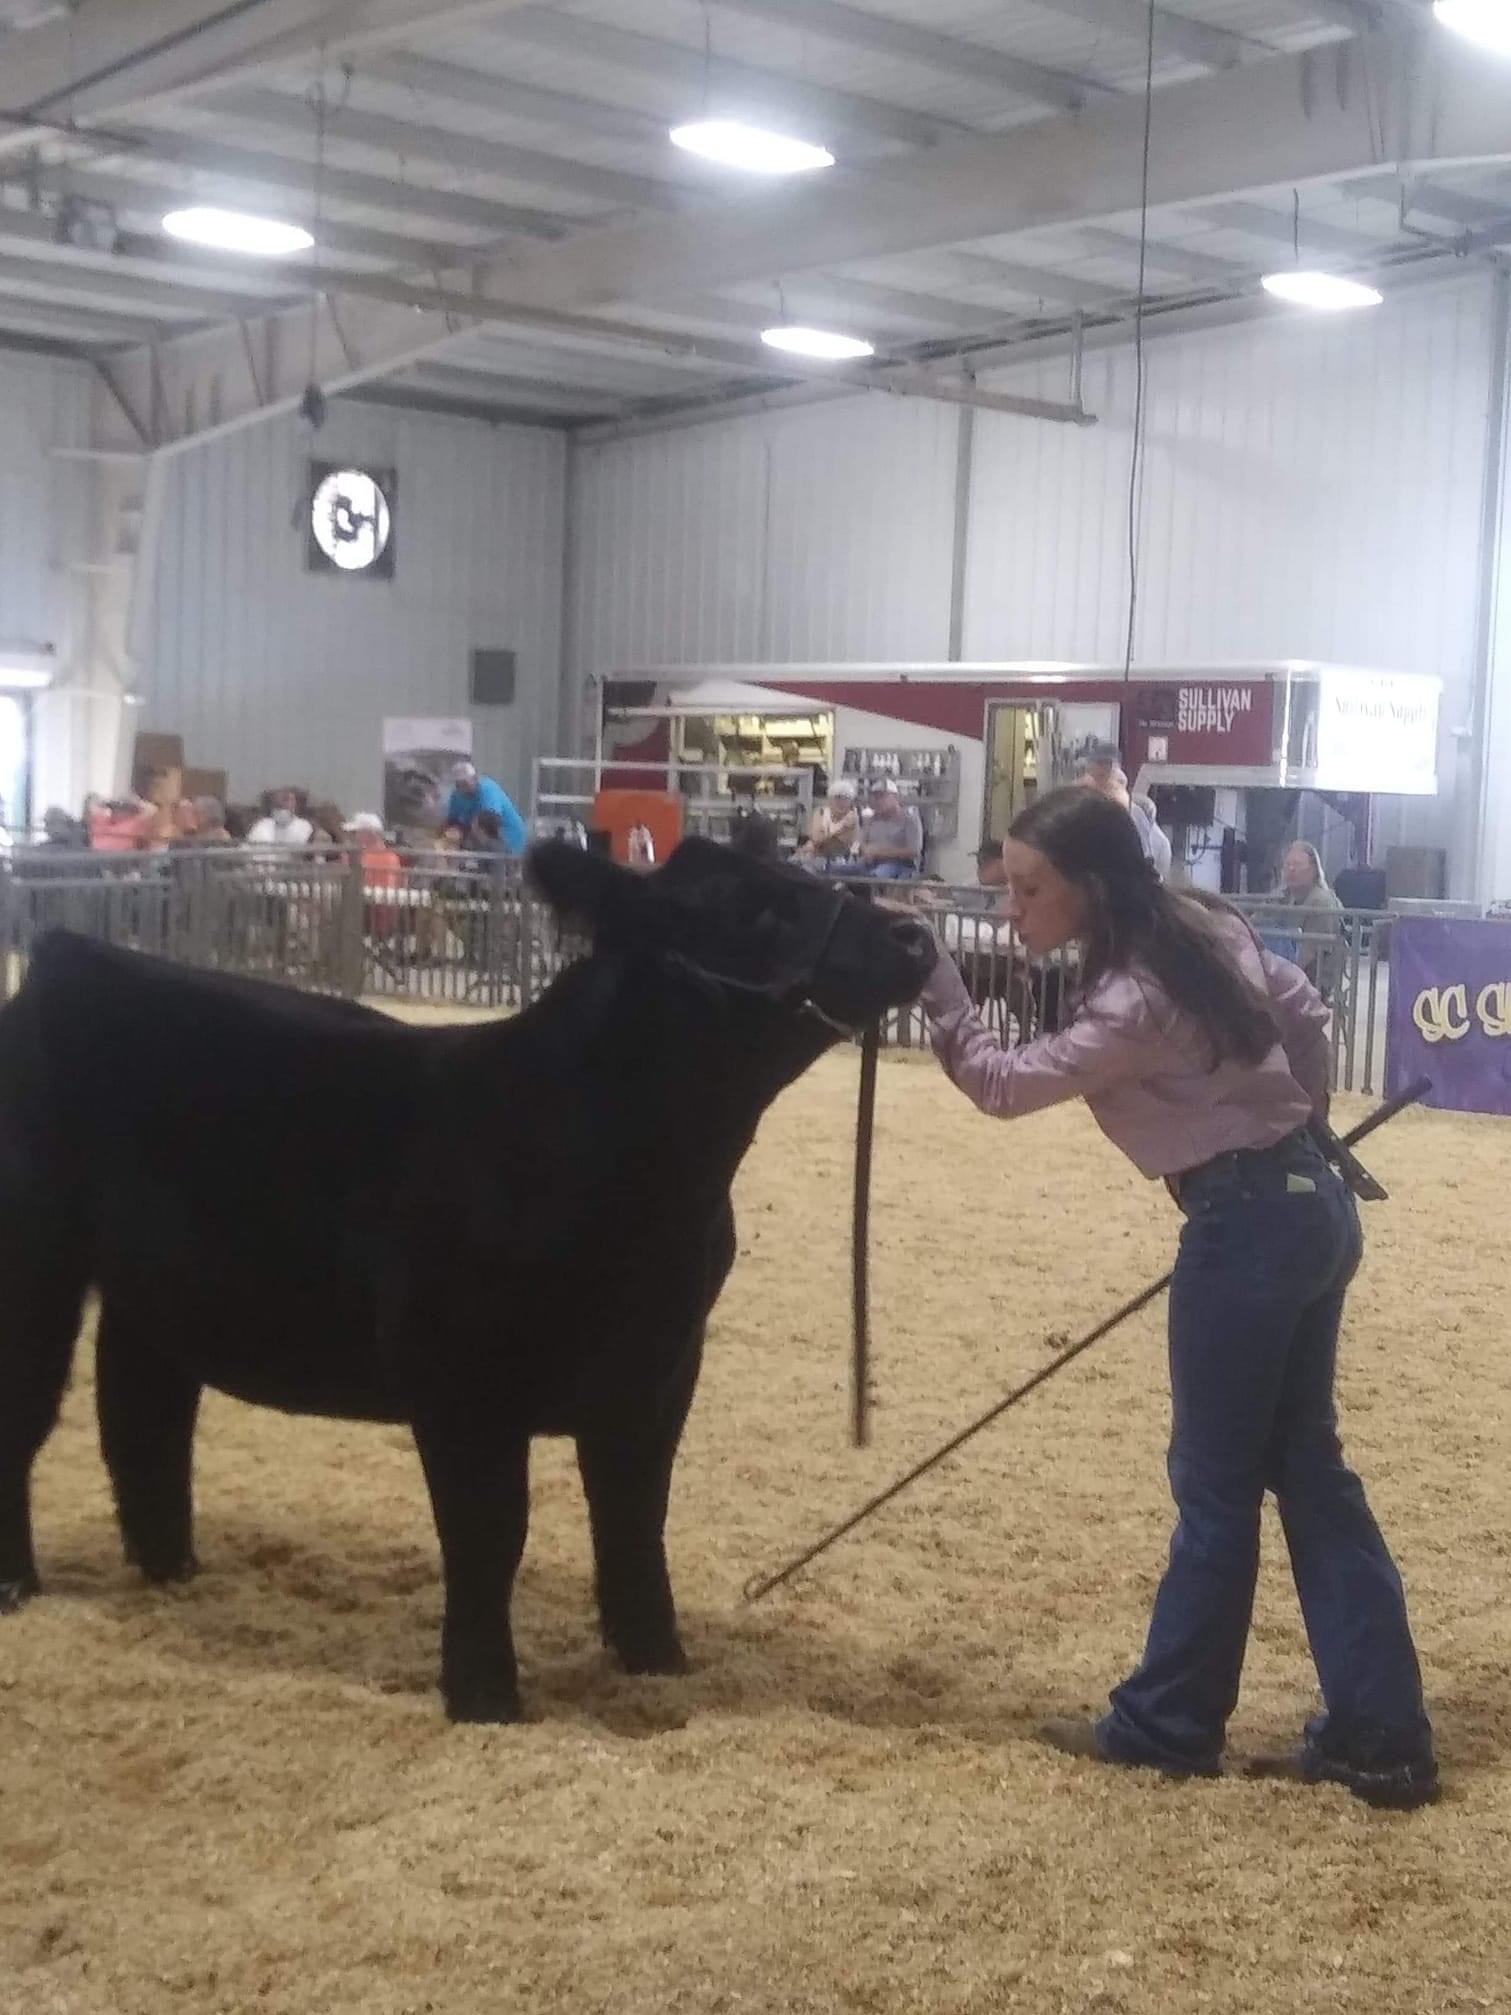 Showing cattle during a livestock show